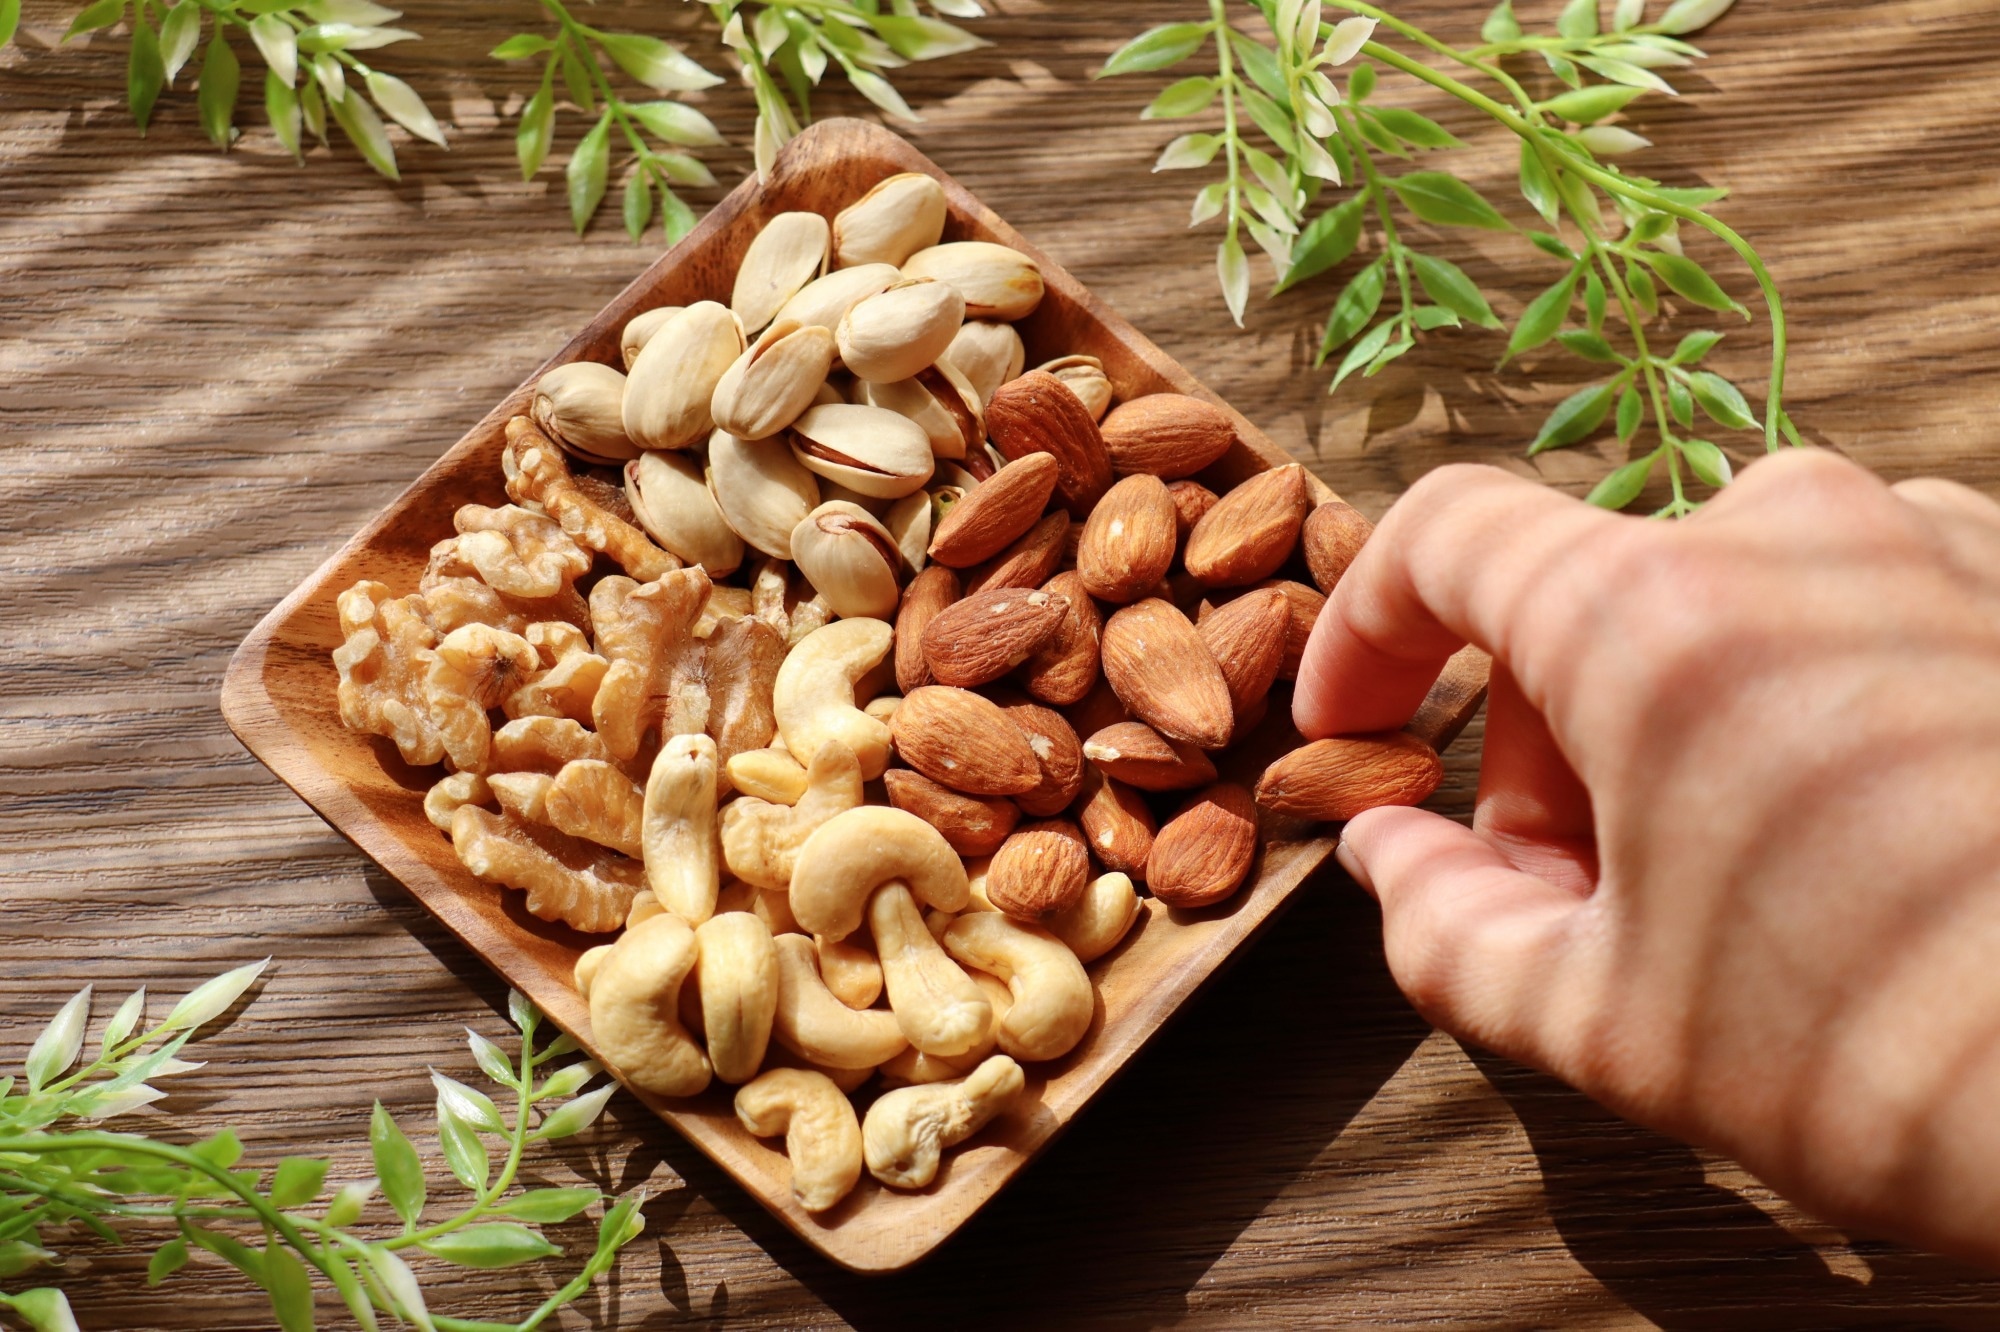 Study: Longer-term mixed nut consumption improves brain vascular function and memory: a randomized, controlled crossover trial in older adults.  Image Credit: umaruchan4678 / Shutterstock.com